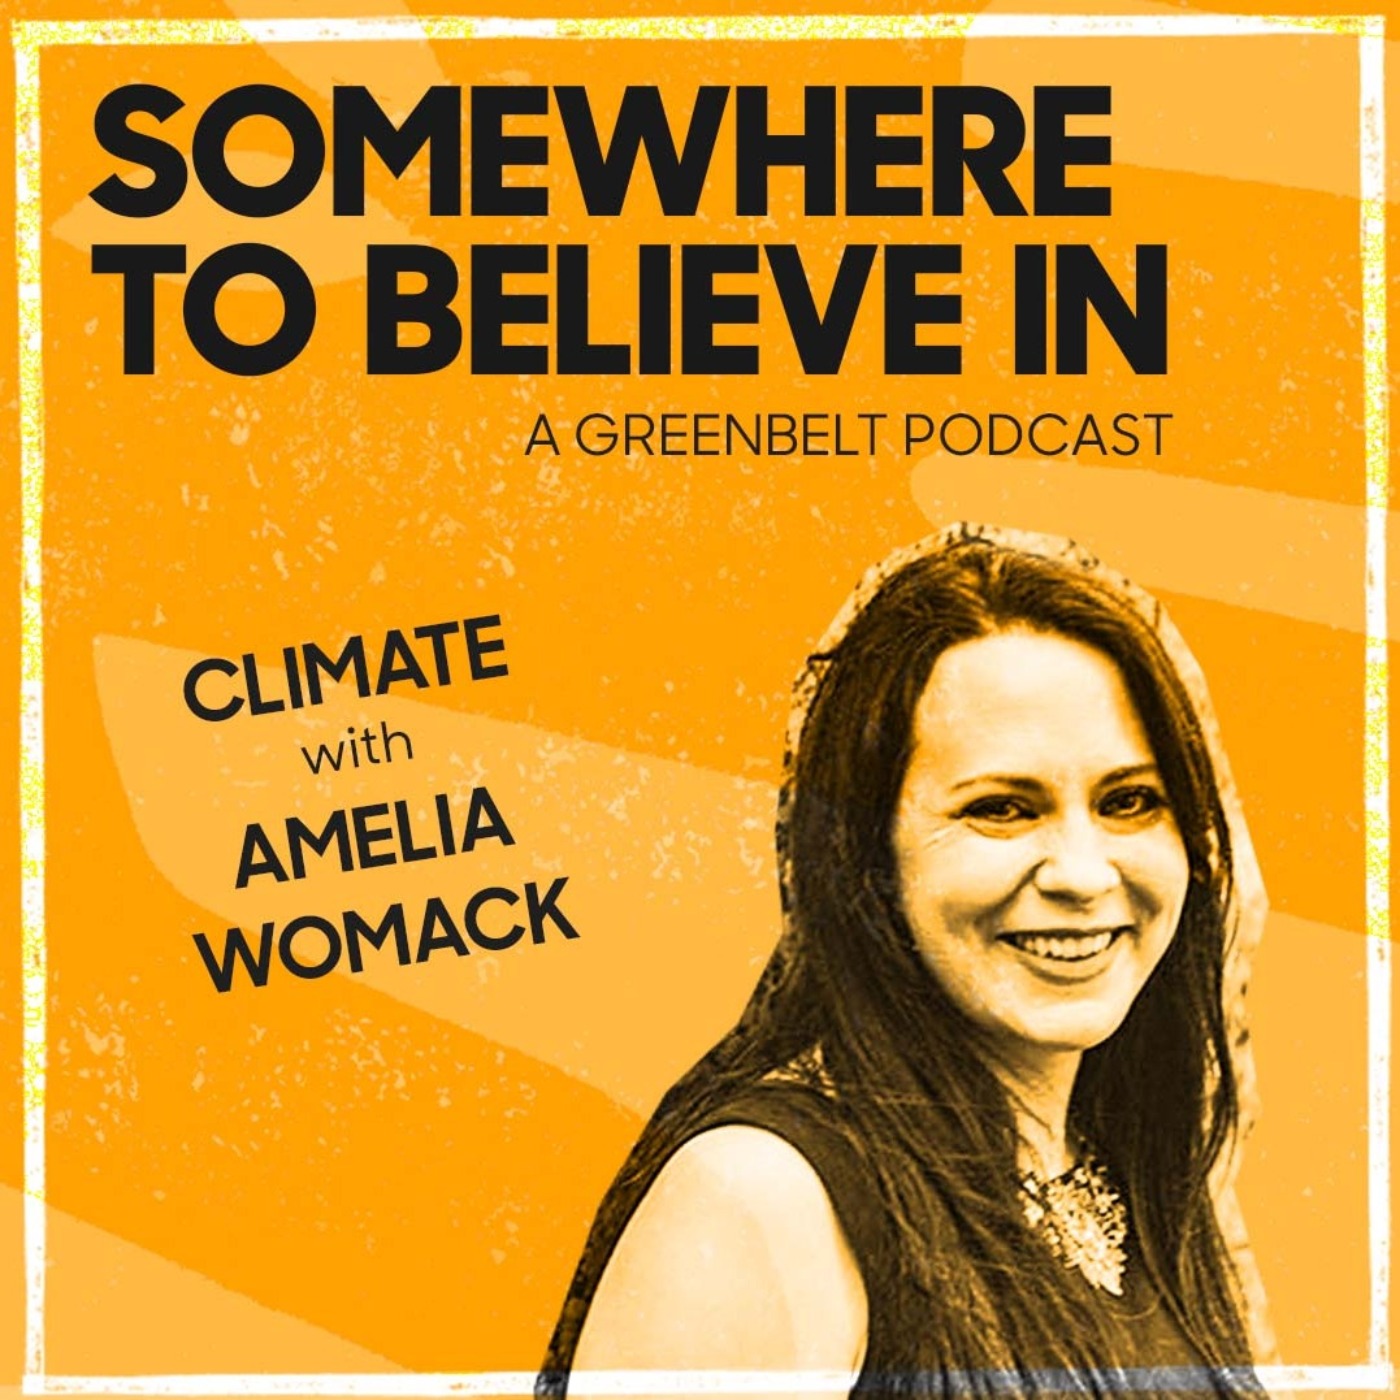 Climate with Amelia Womack